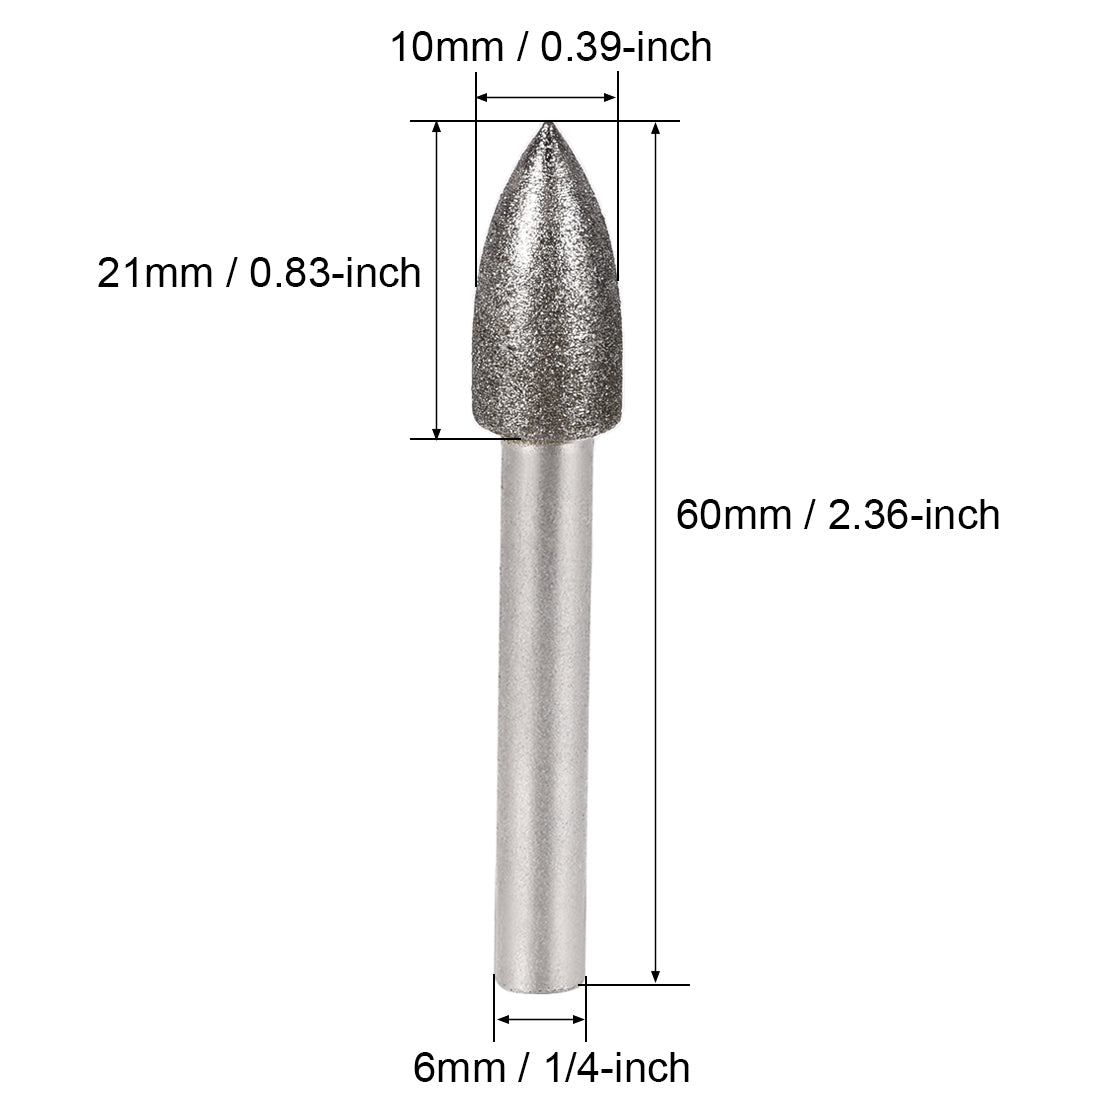 uxcell Uxcell Diamond Burrs Grinding Drill Bits for Carving Rotary Tool 1/4-Inch Shank 10mm Tapered 120 Grit 2 Pcs